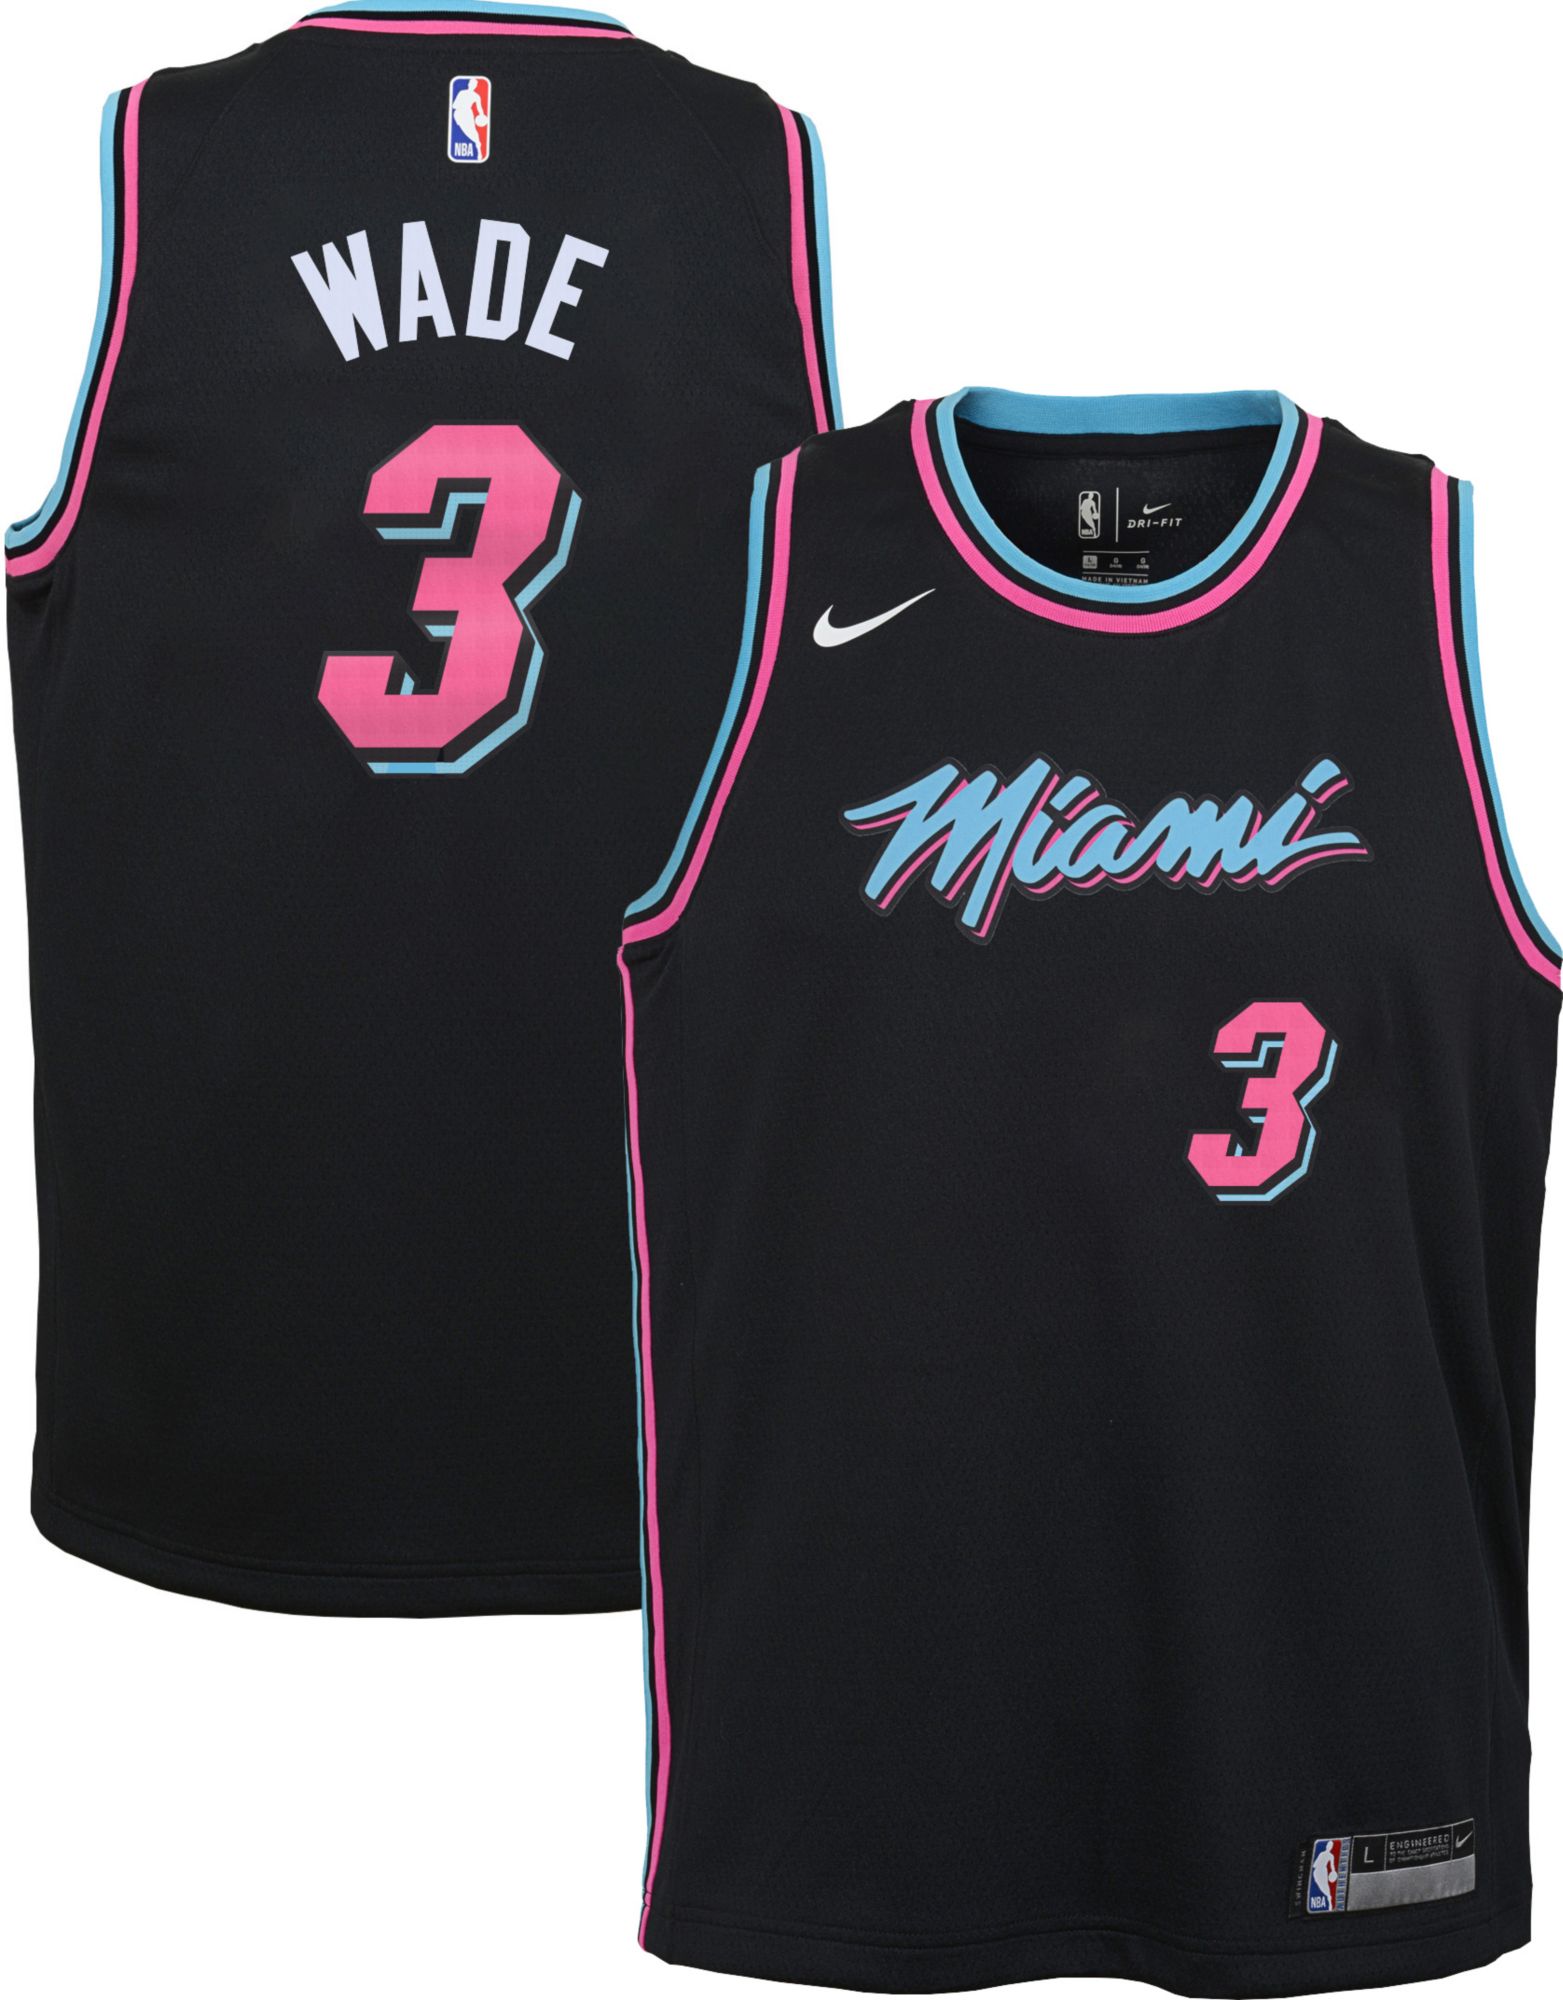 what is dwyane wade jersey number